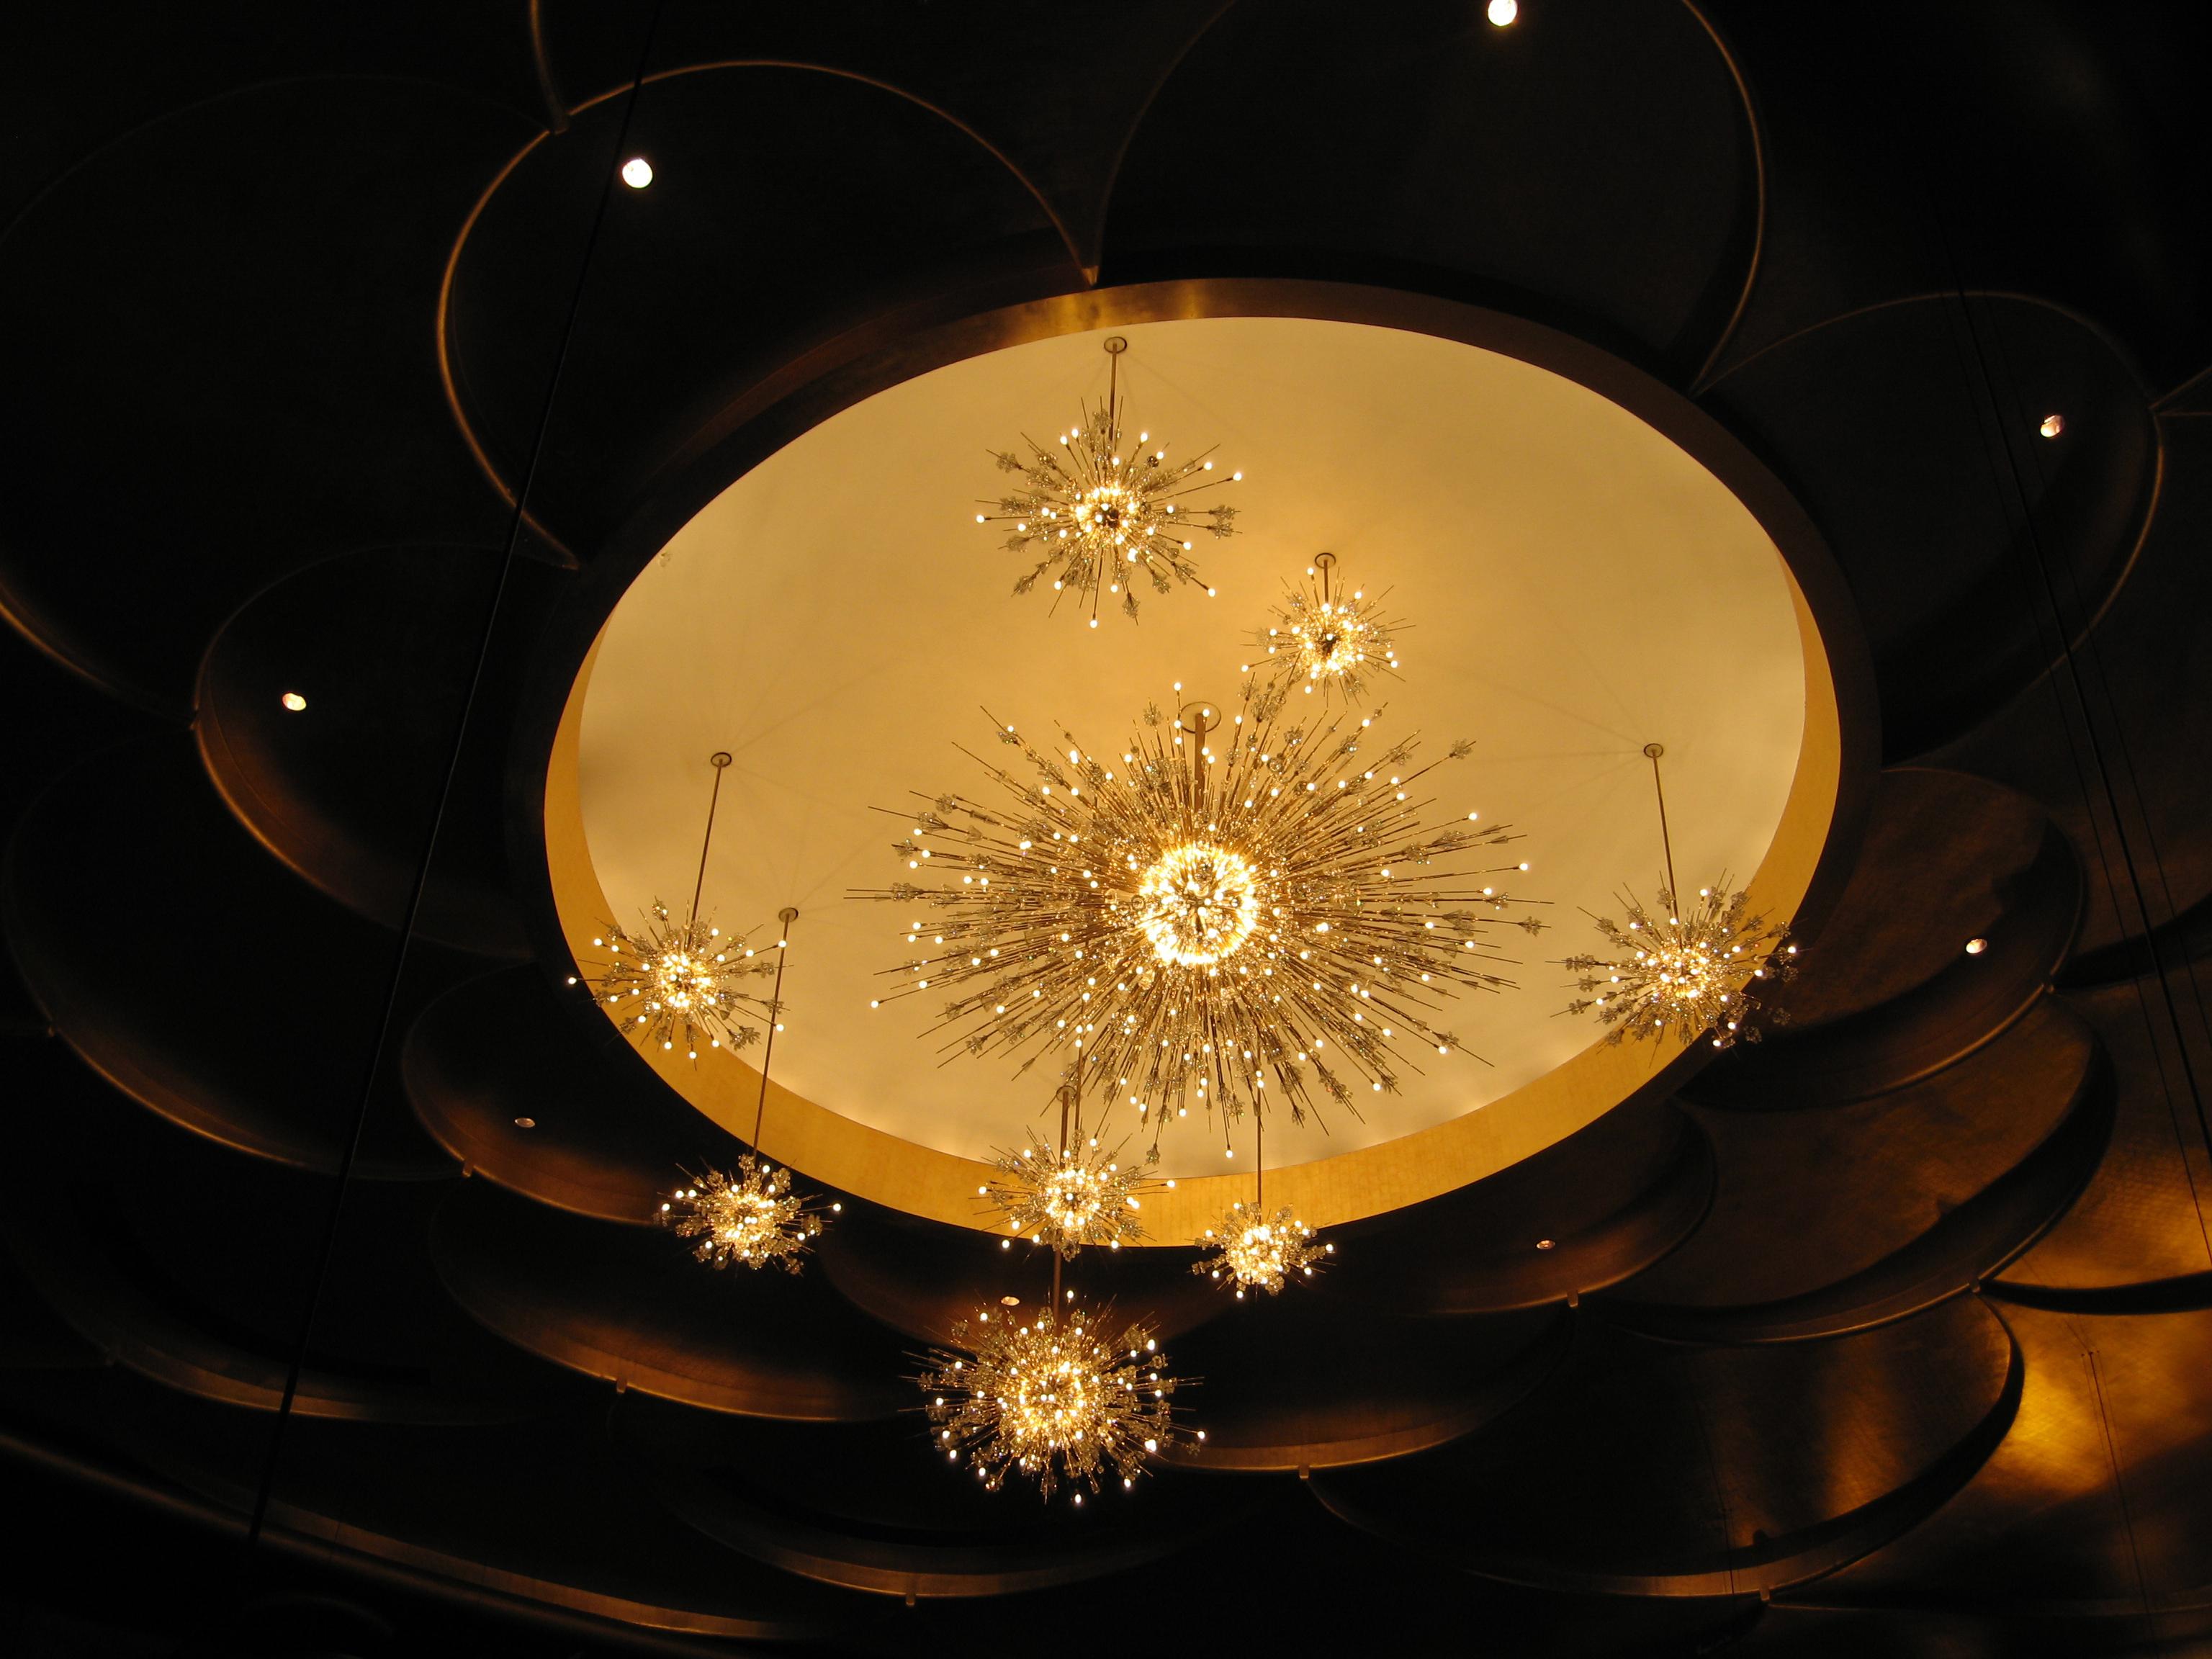 Lobmeyr Metropolitan Opera Crystal Chandelier Auditorium 6660-D-11 In New Condition For Sale In New York, NY